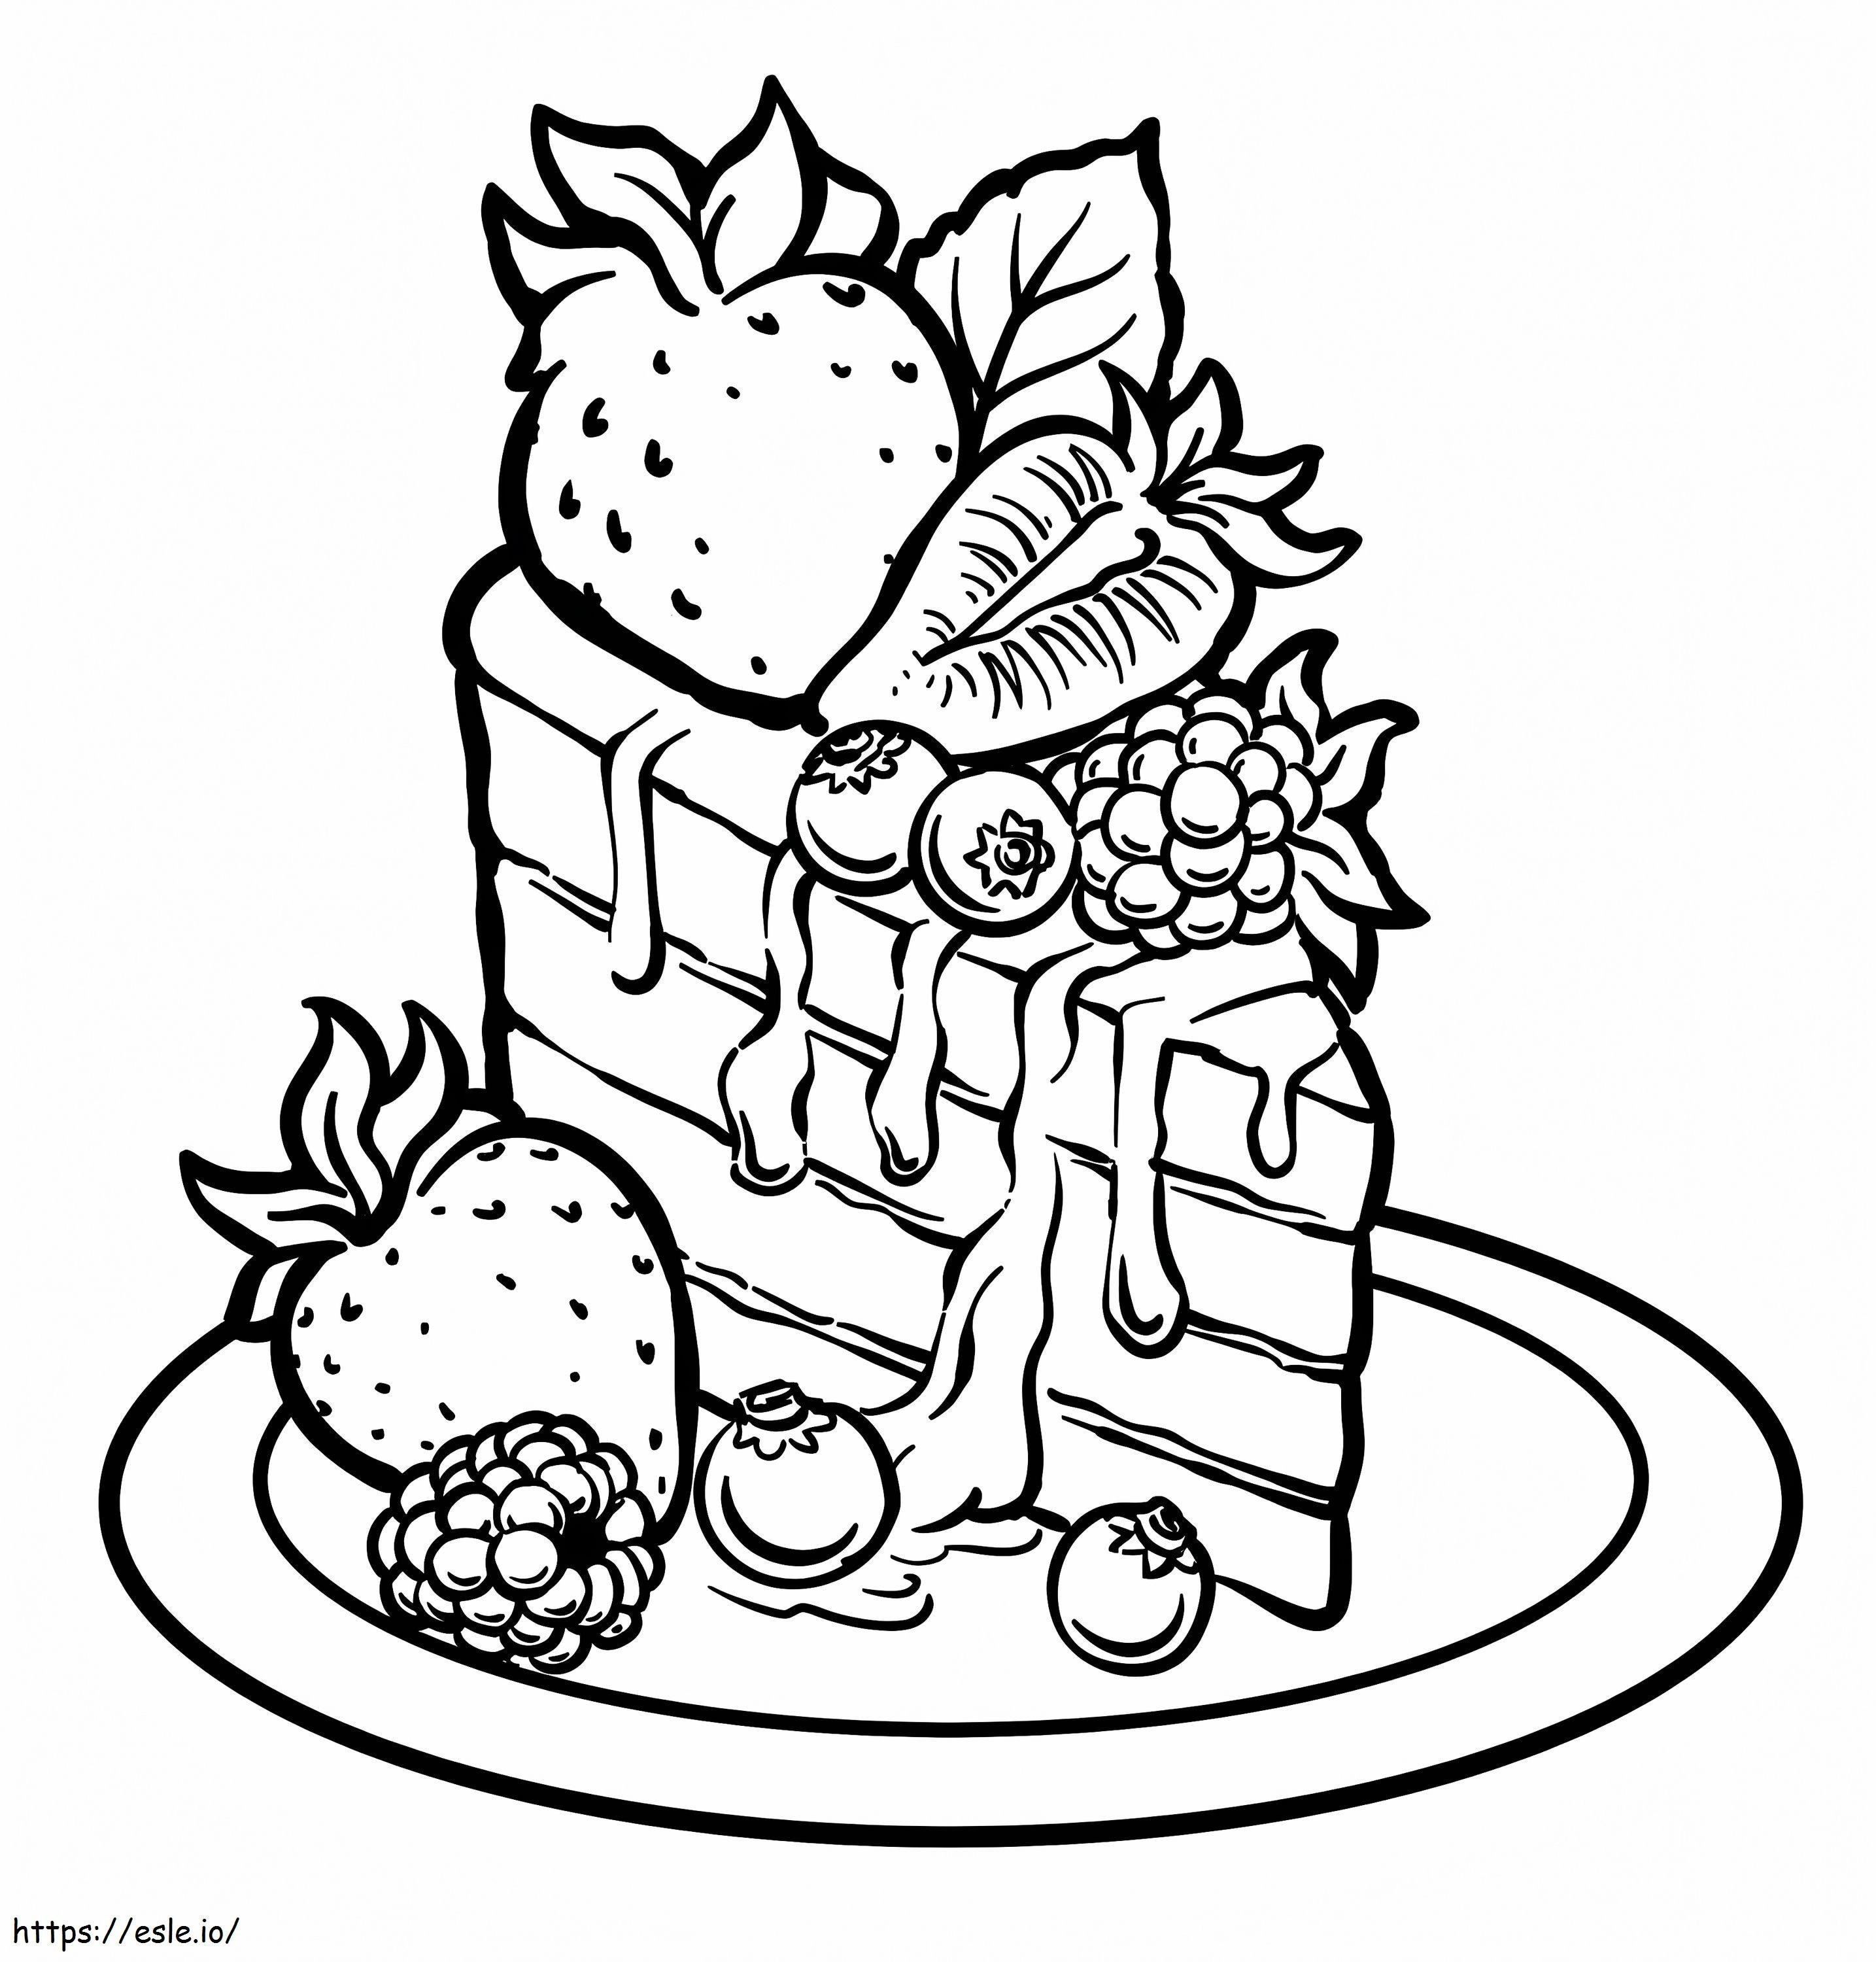 A Piece Of Cake coloring page